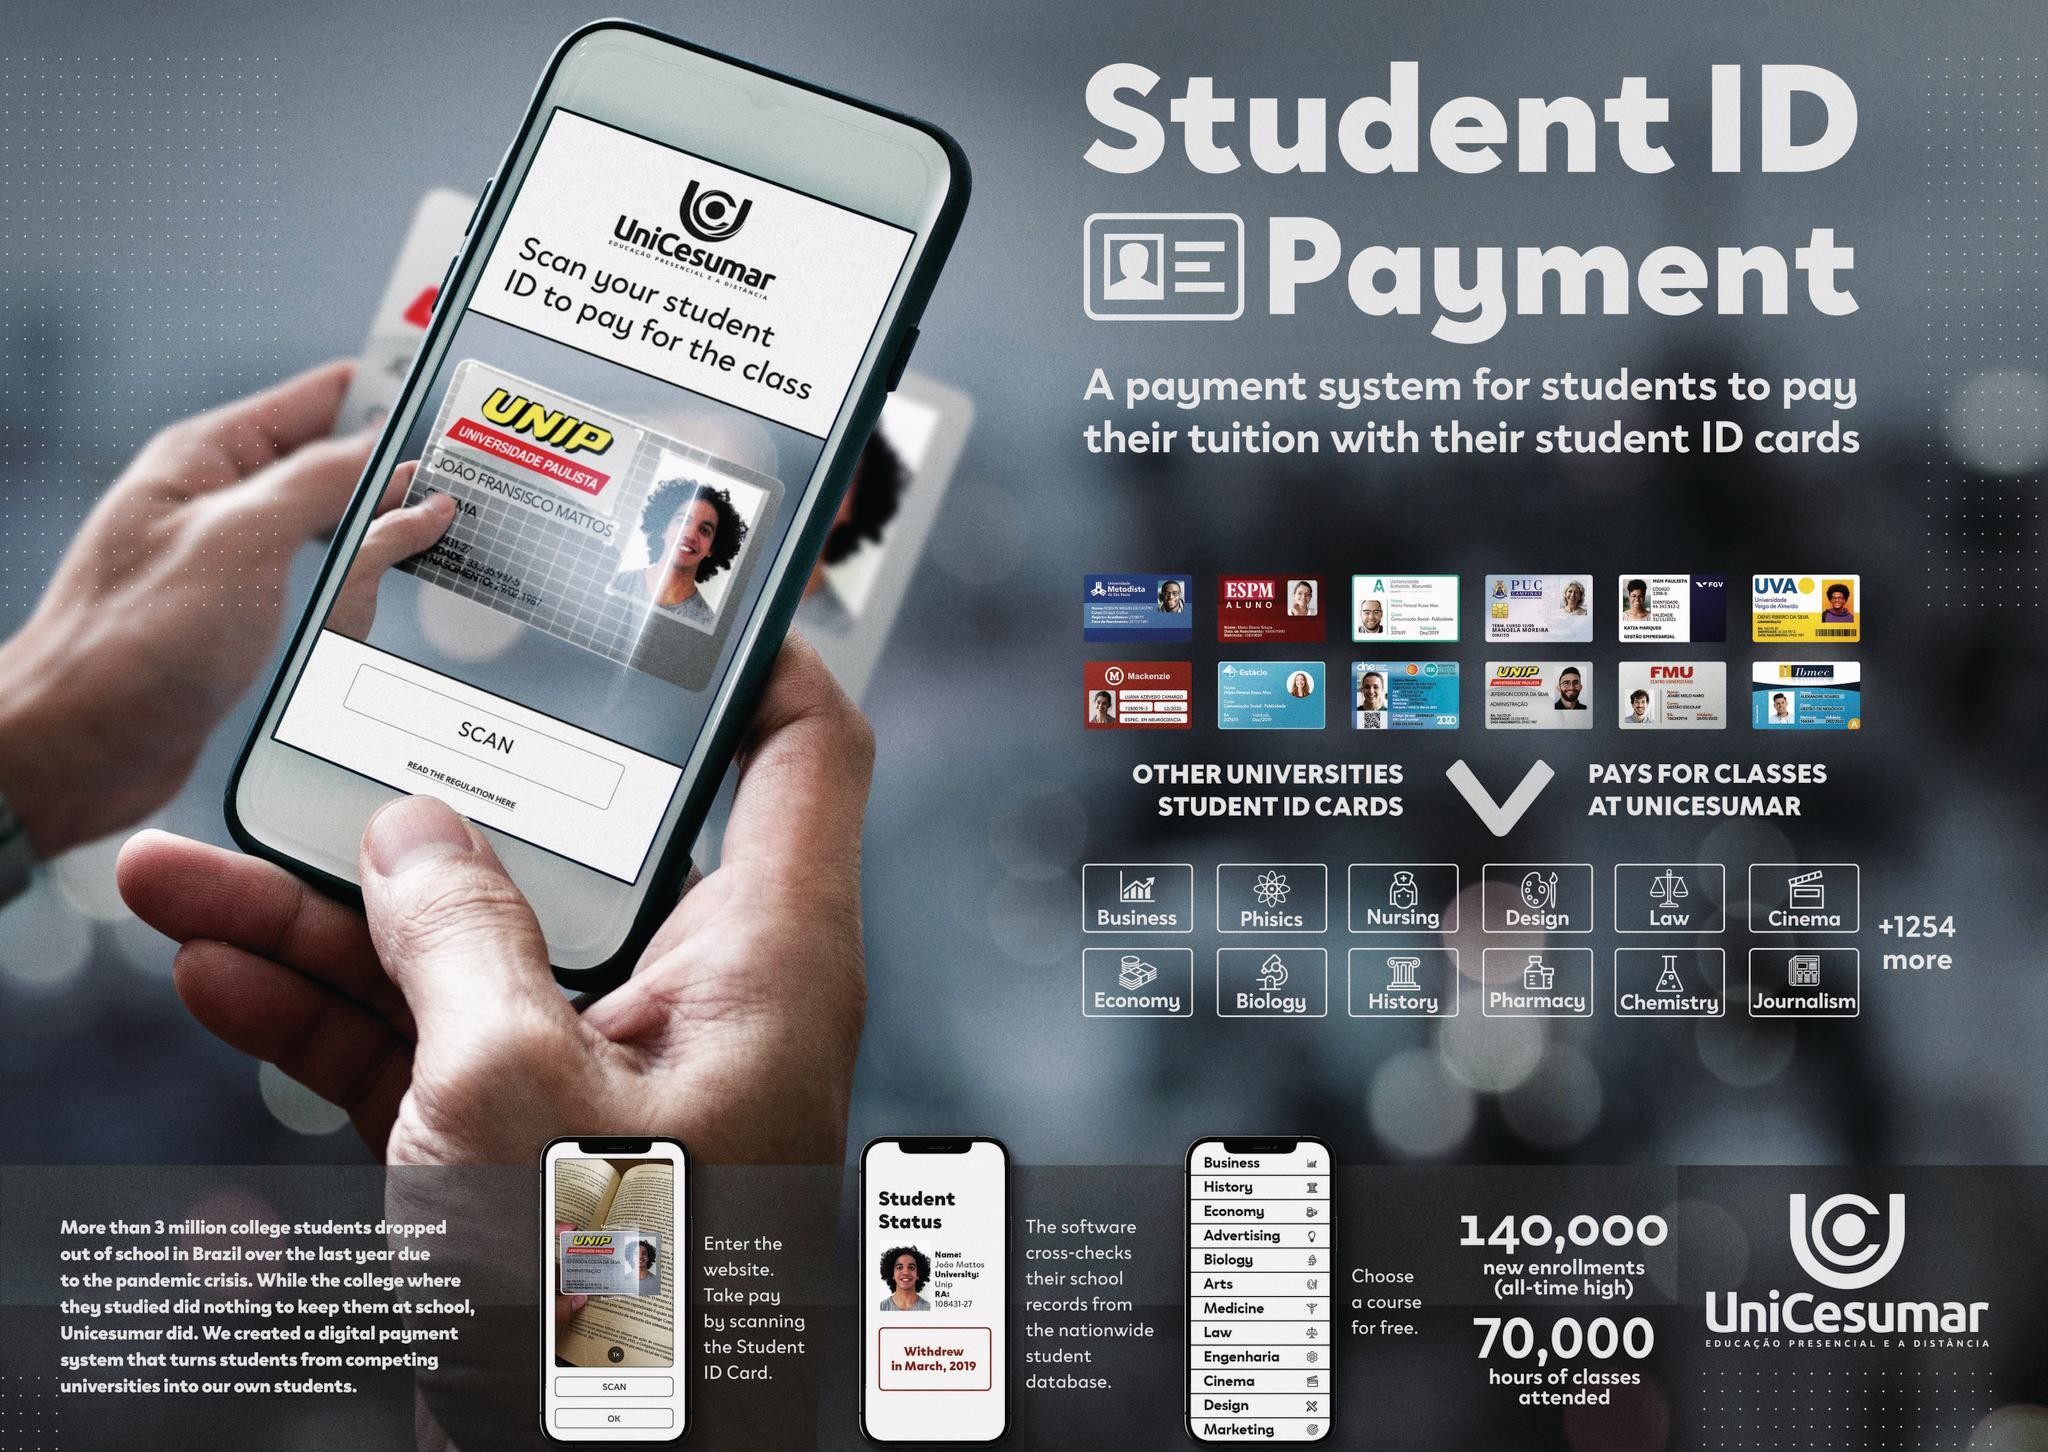 STUDENT ID PAYMENT